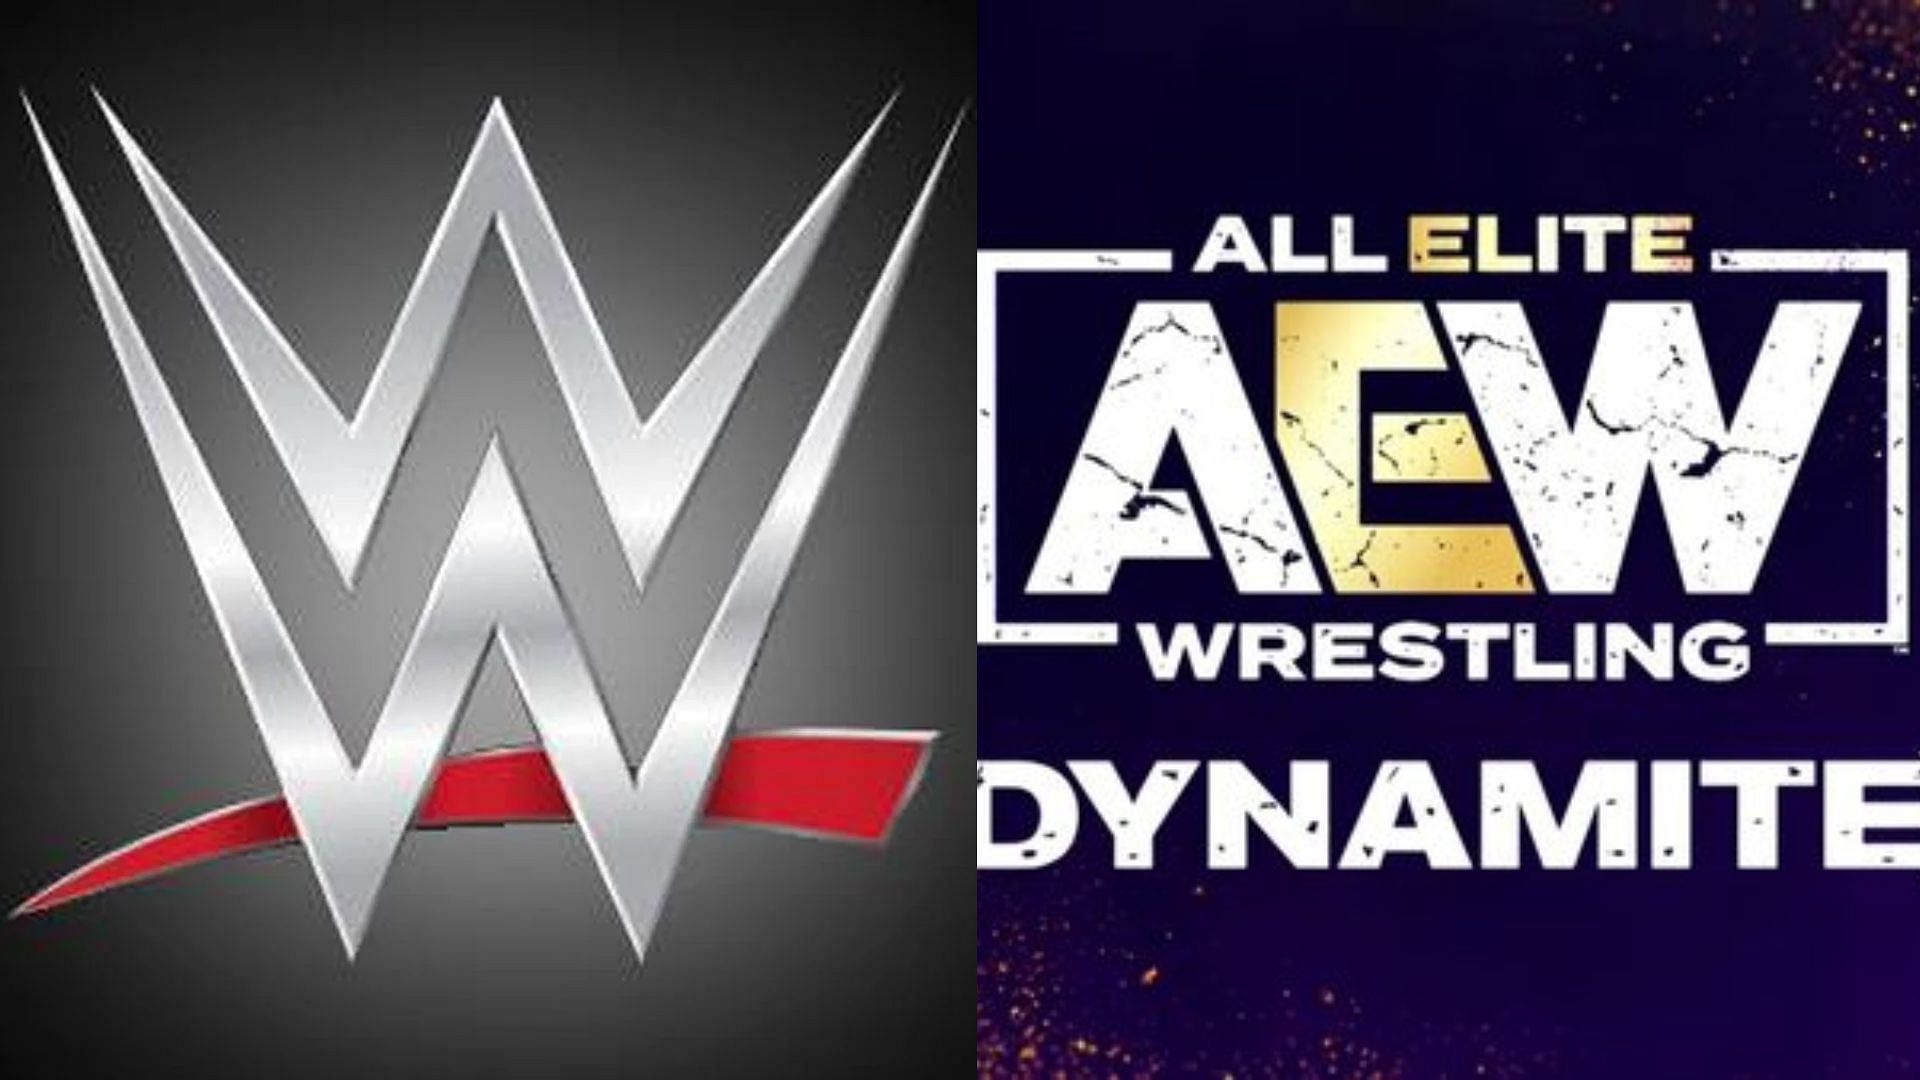 A former WWE champion will address the crowd on Dynamite this week.